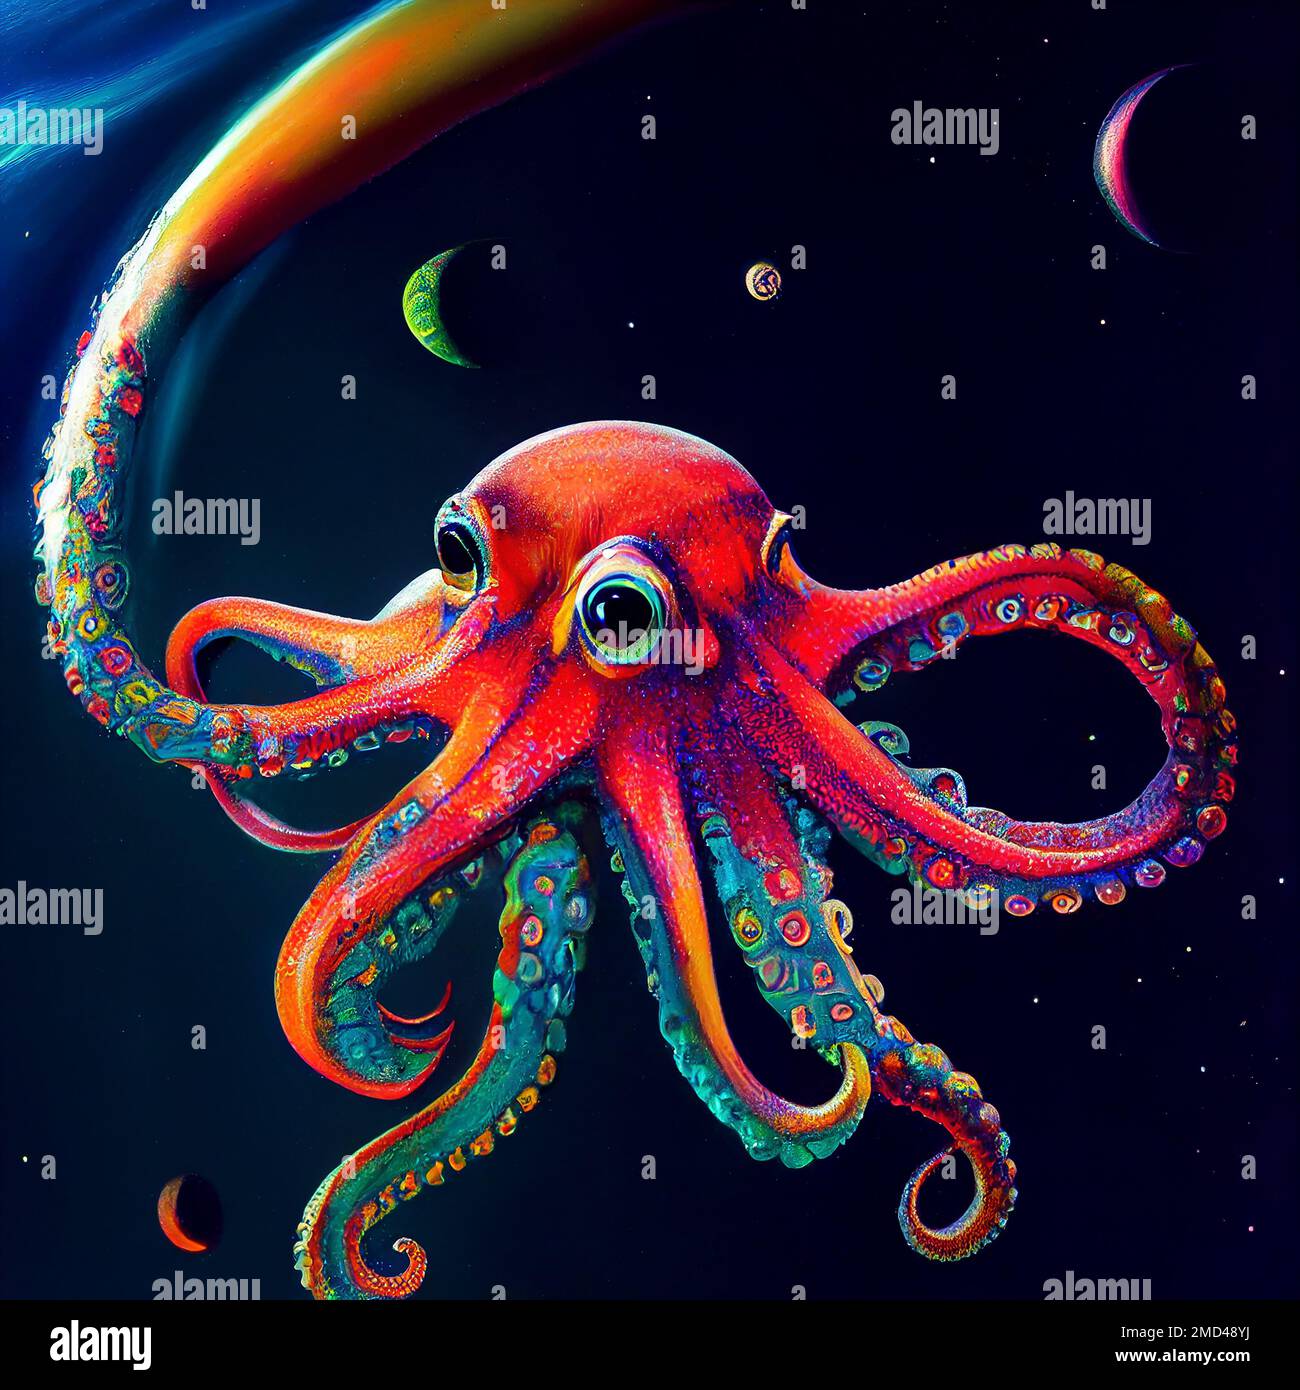 Colorful octopus in space Stock Photo